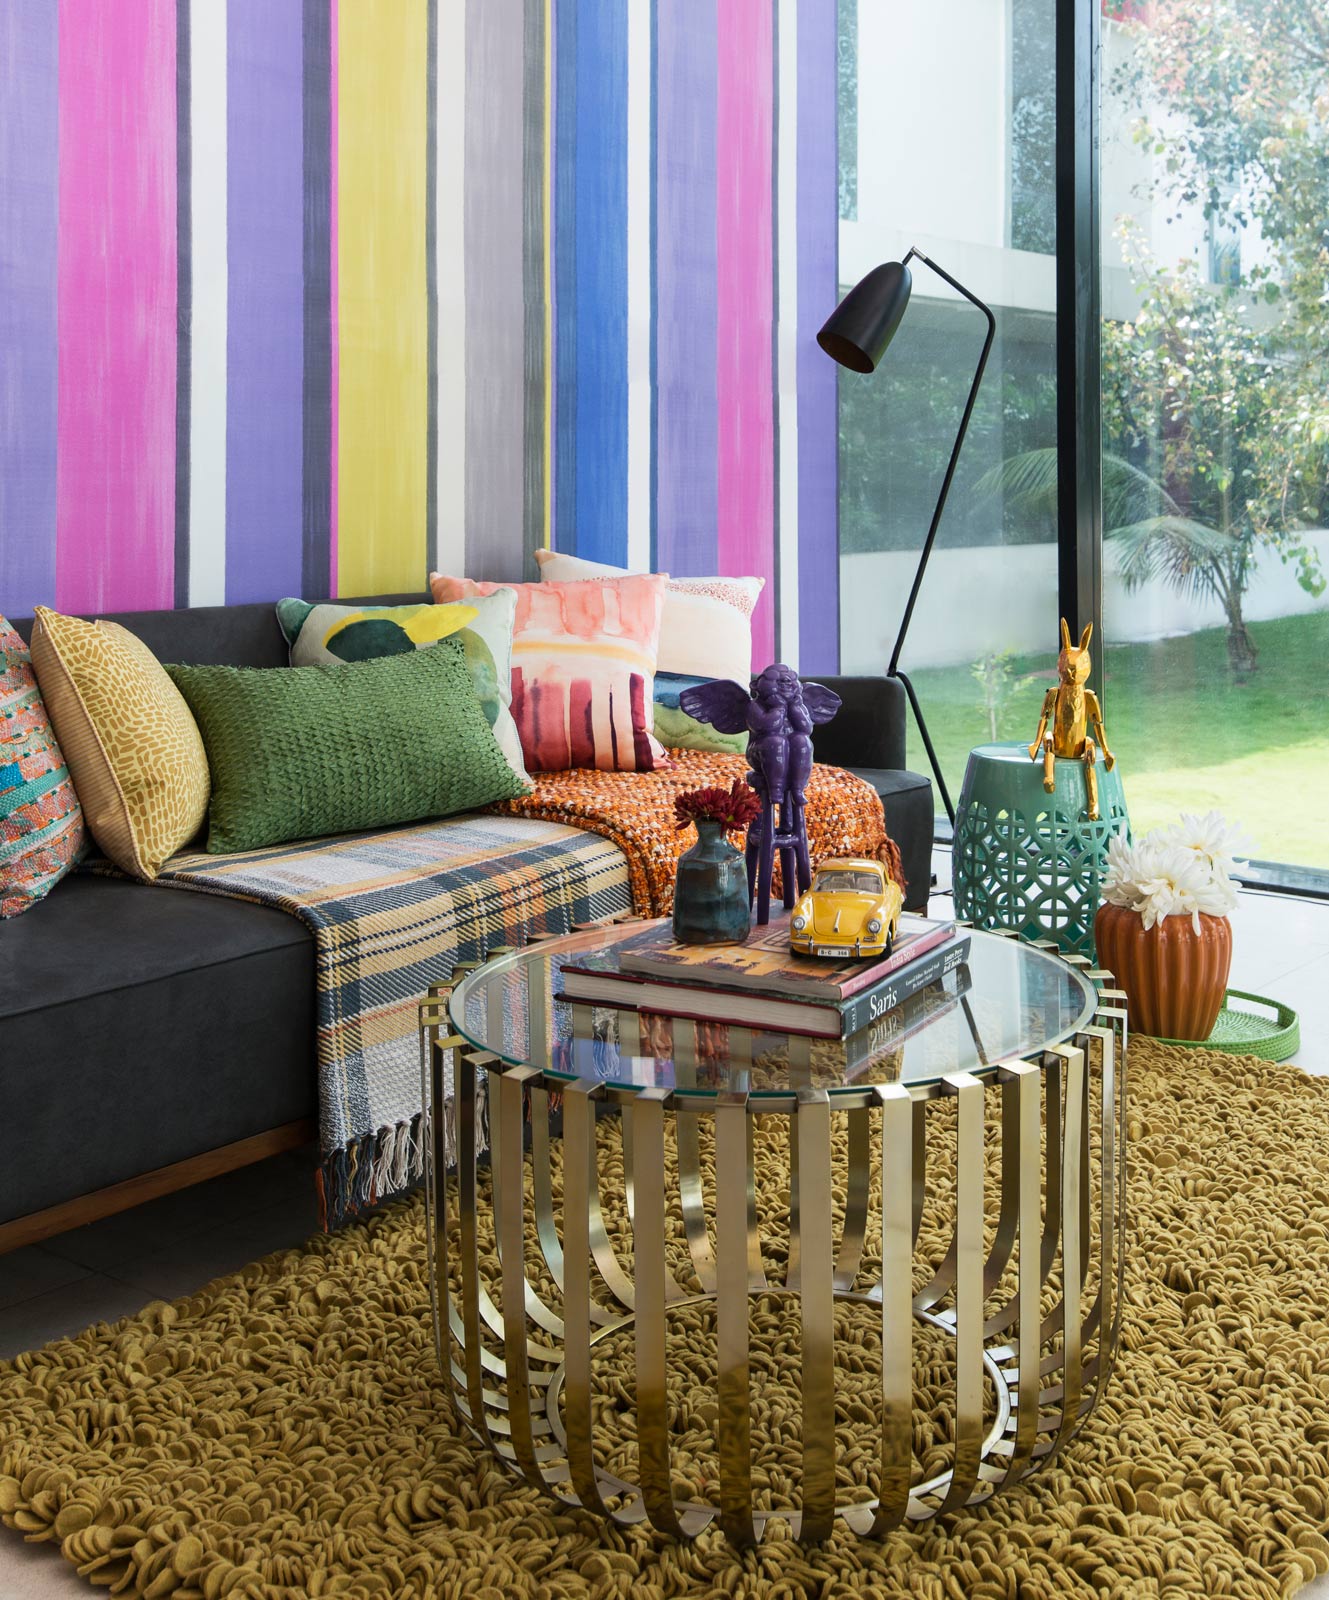 Living Room Design Ideas With Striped Wallpaper & Eccentric Accessories – Beautiful Homes